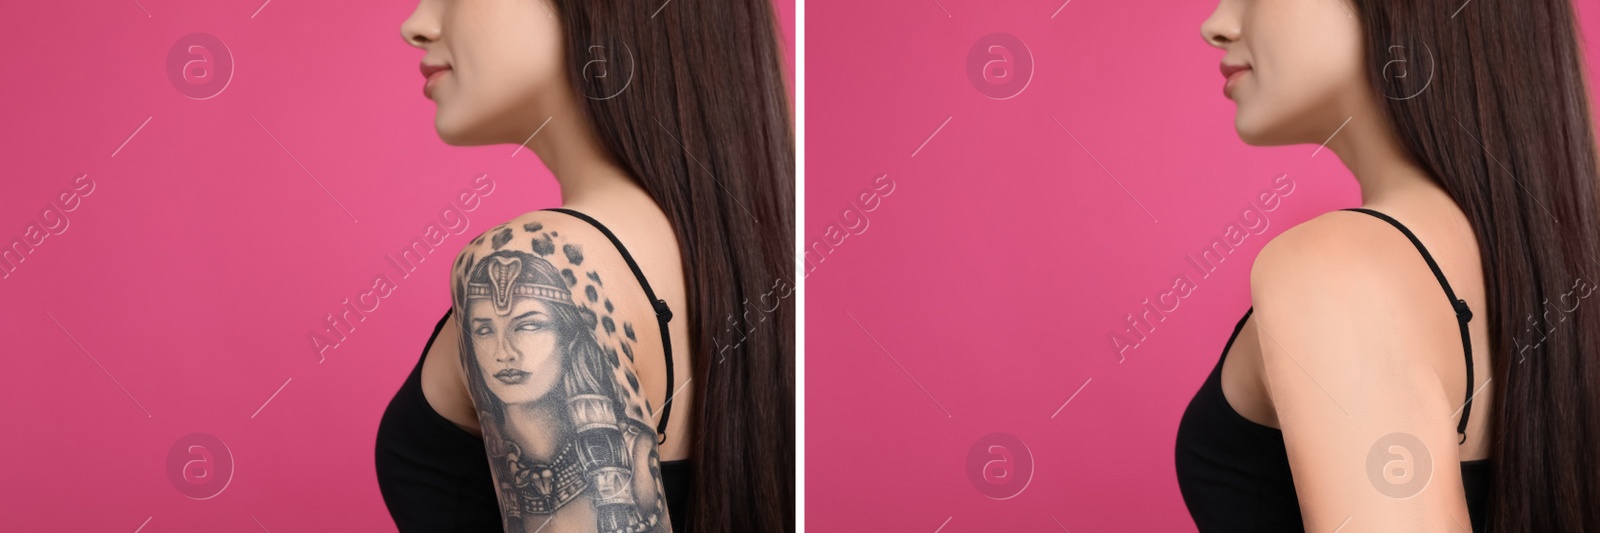 Image of Woman before and after laser tattoo removal procedure on pink background, closeup. Collage with photos, banner design